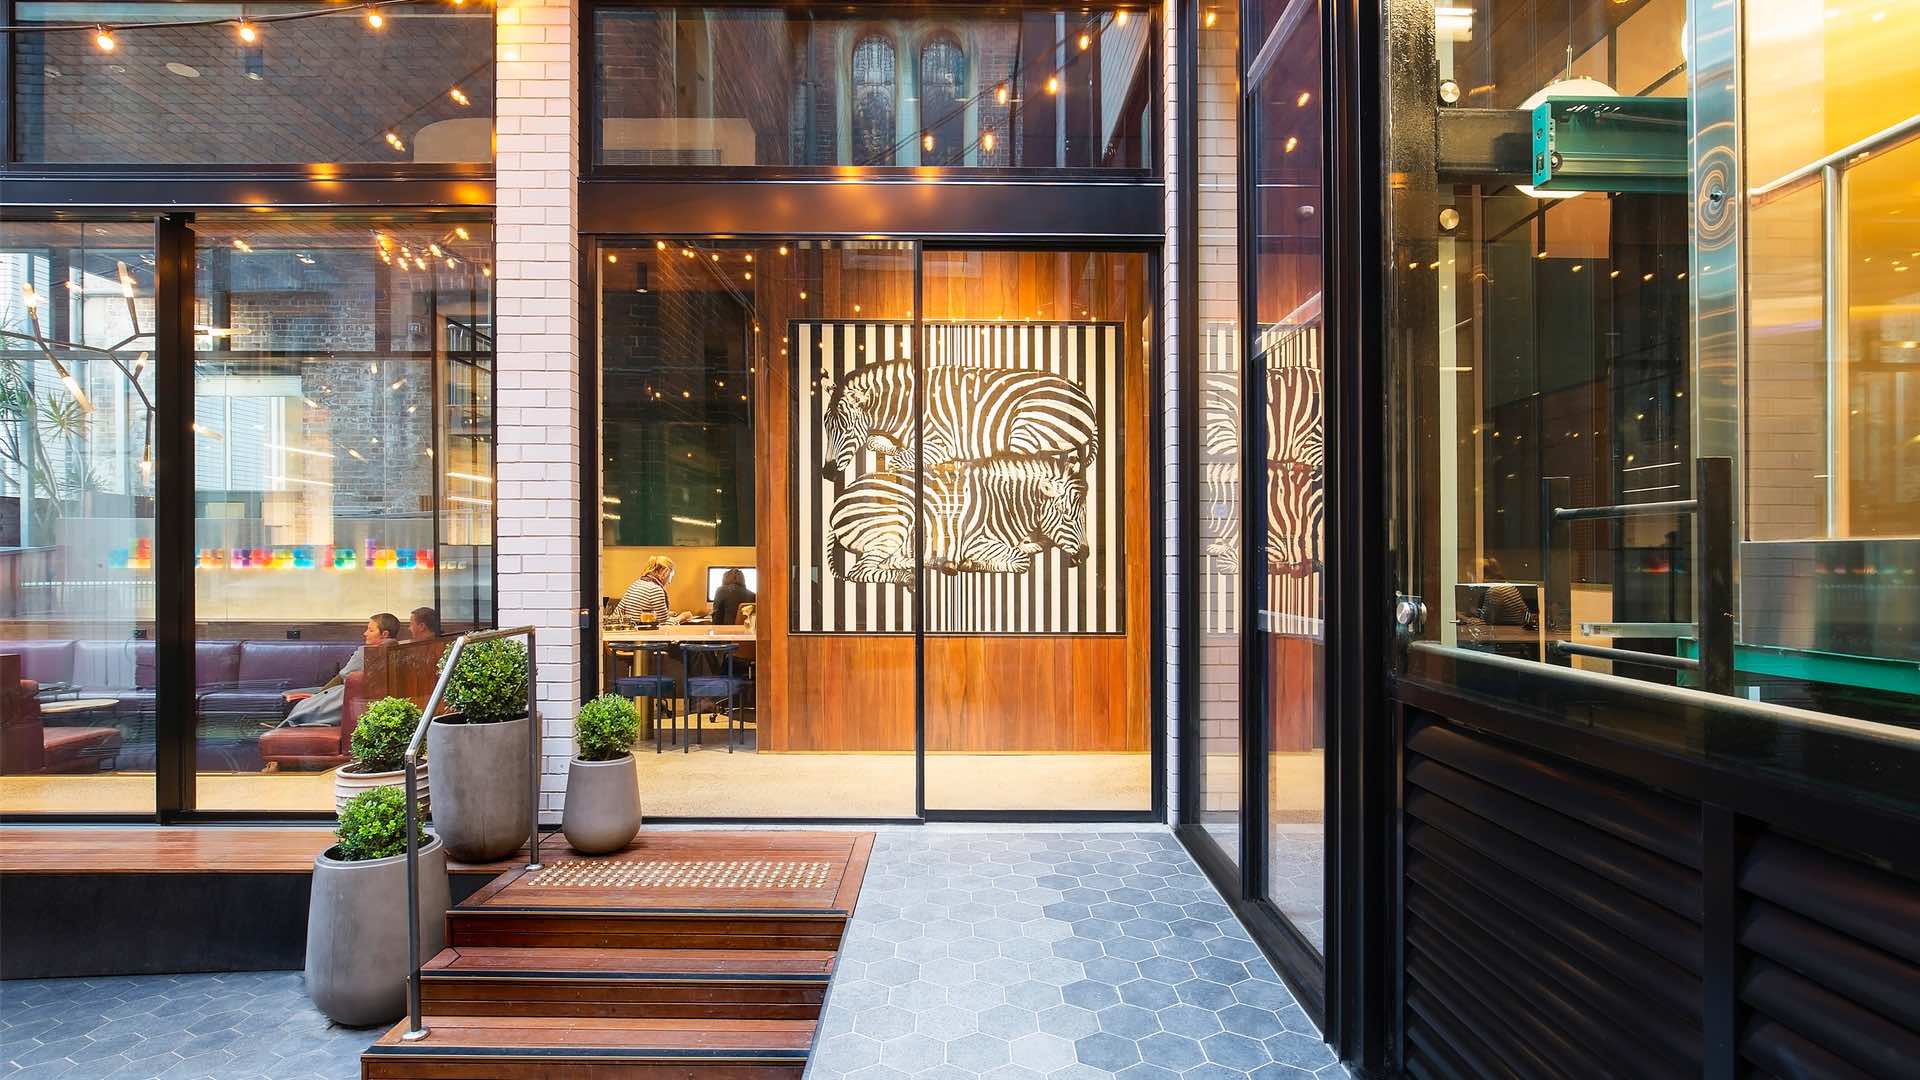 Airbnb Has Launched a New Boutique Hotel in Surry Hills